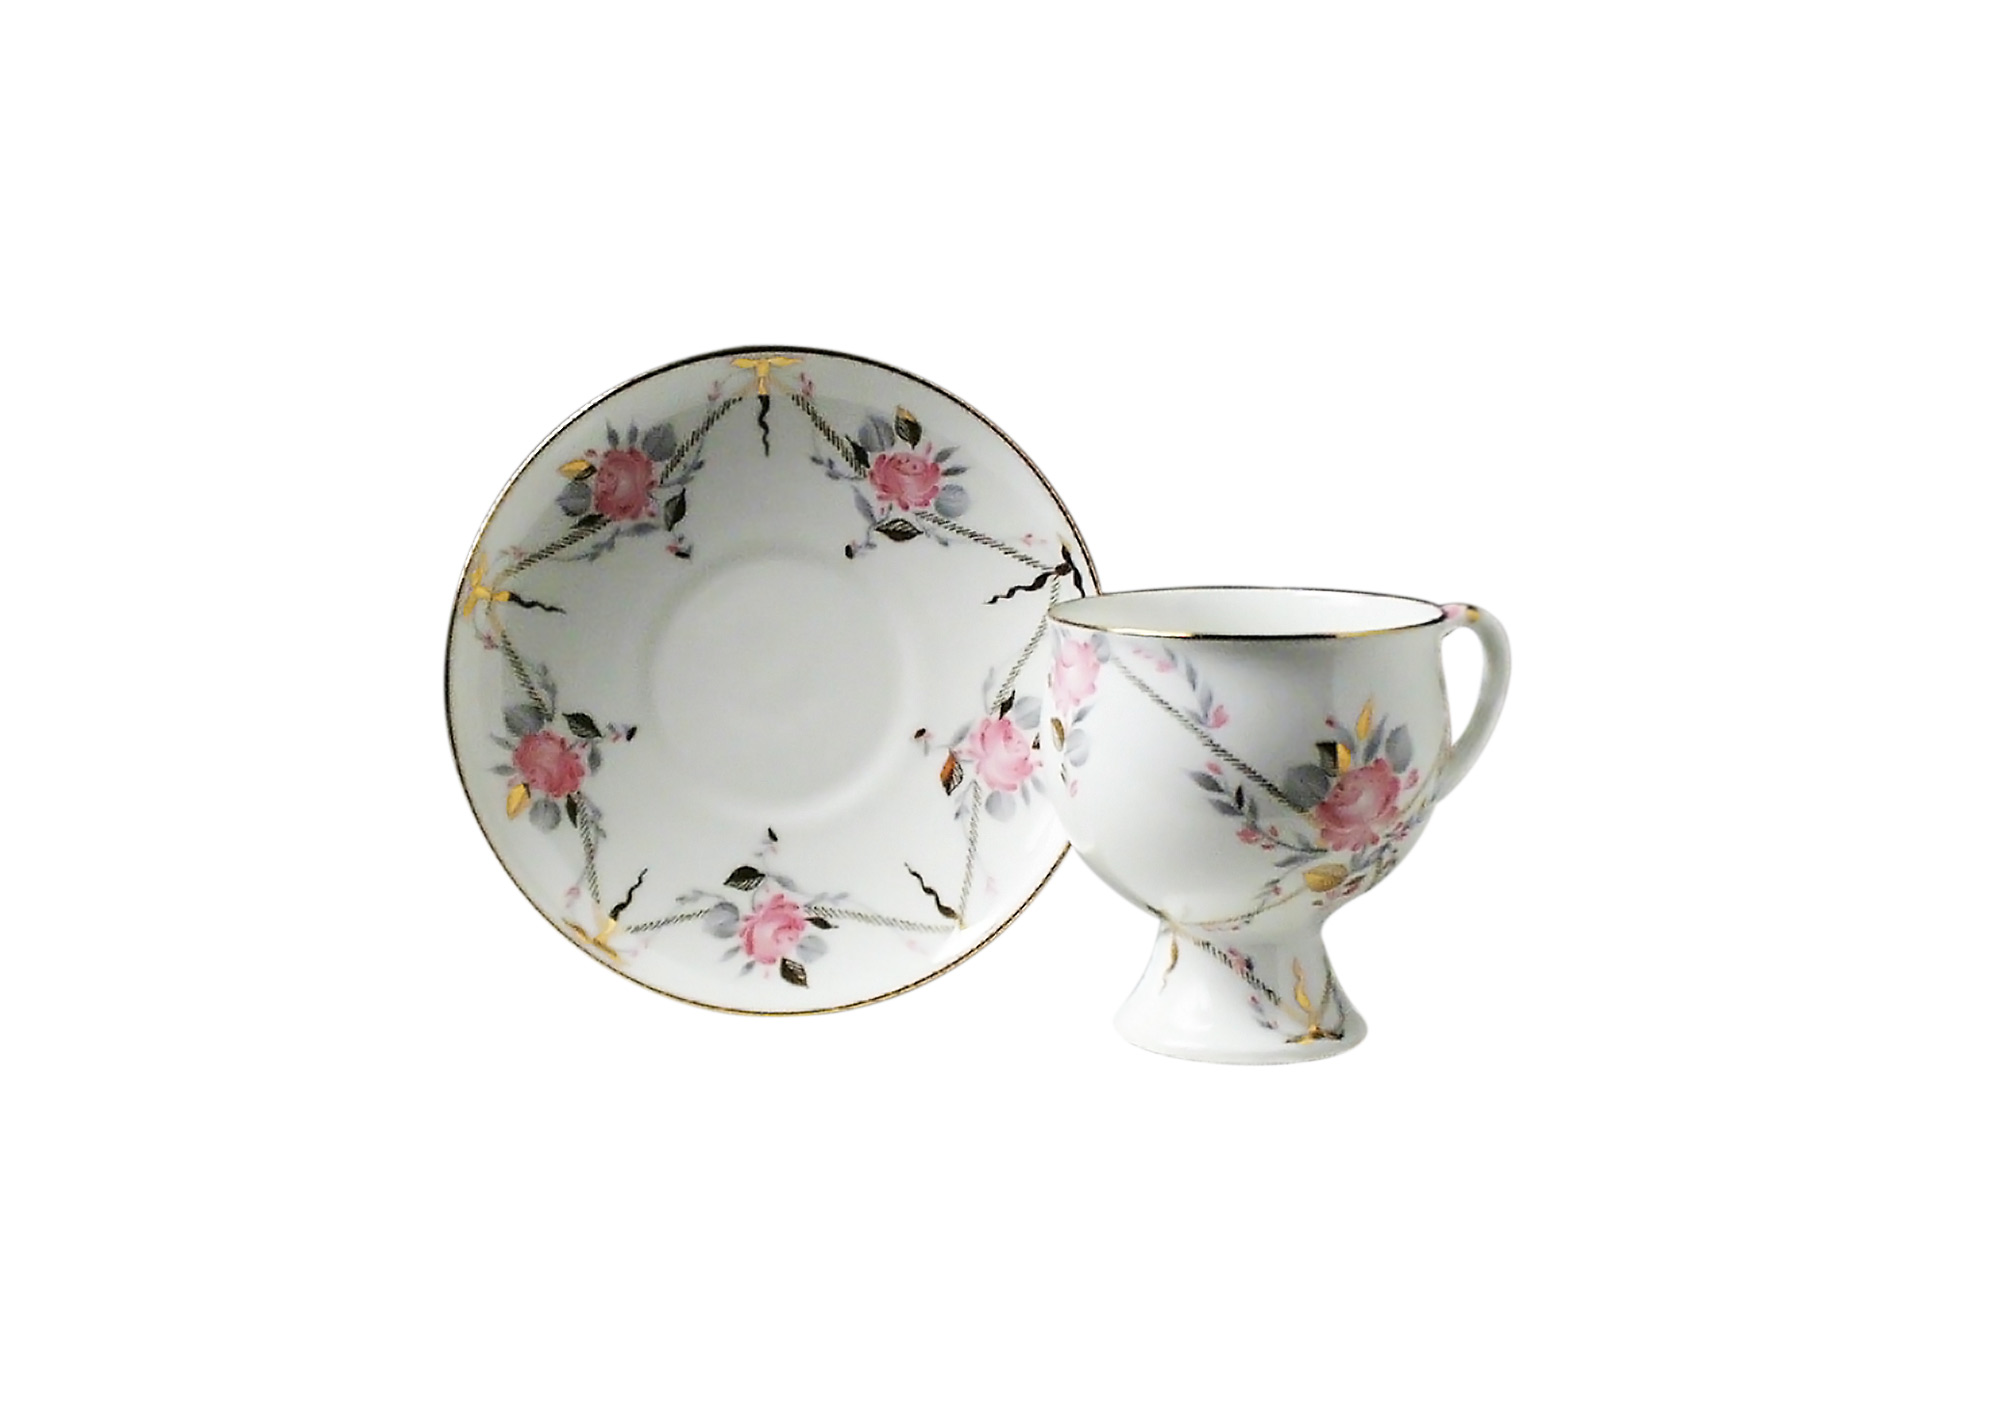 Buy Gallant Classic Coffee Cup and Saucer at GoldenCockerel.com